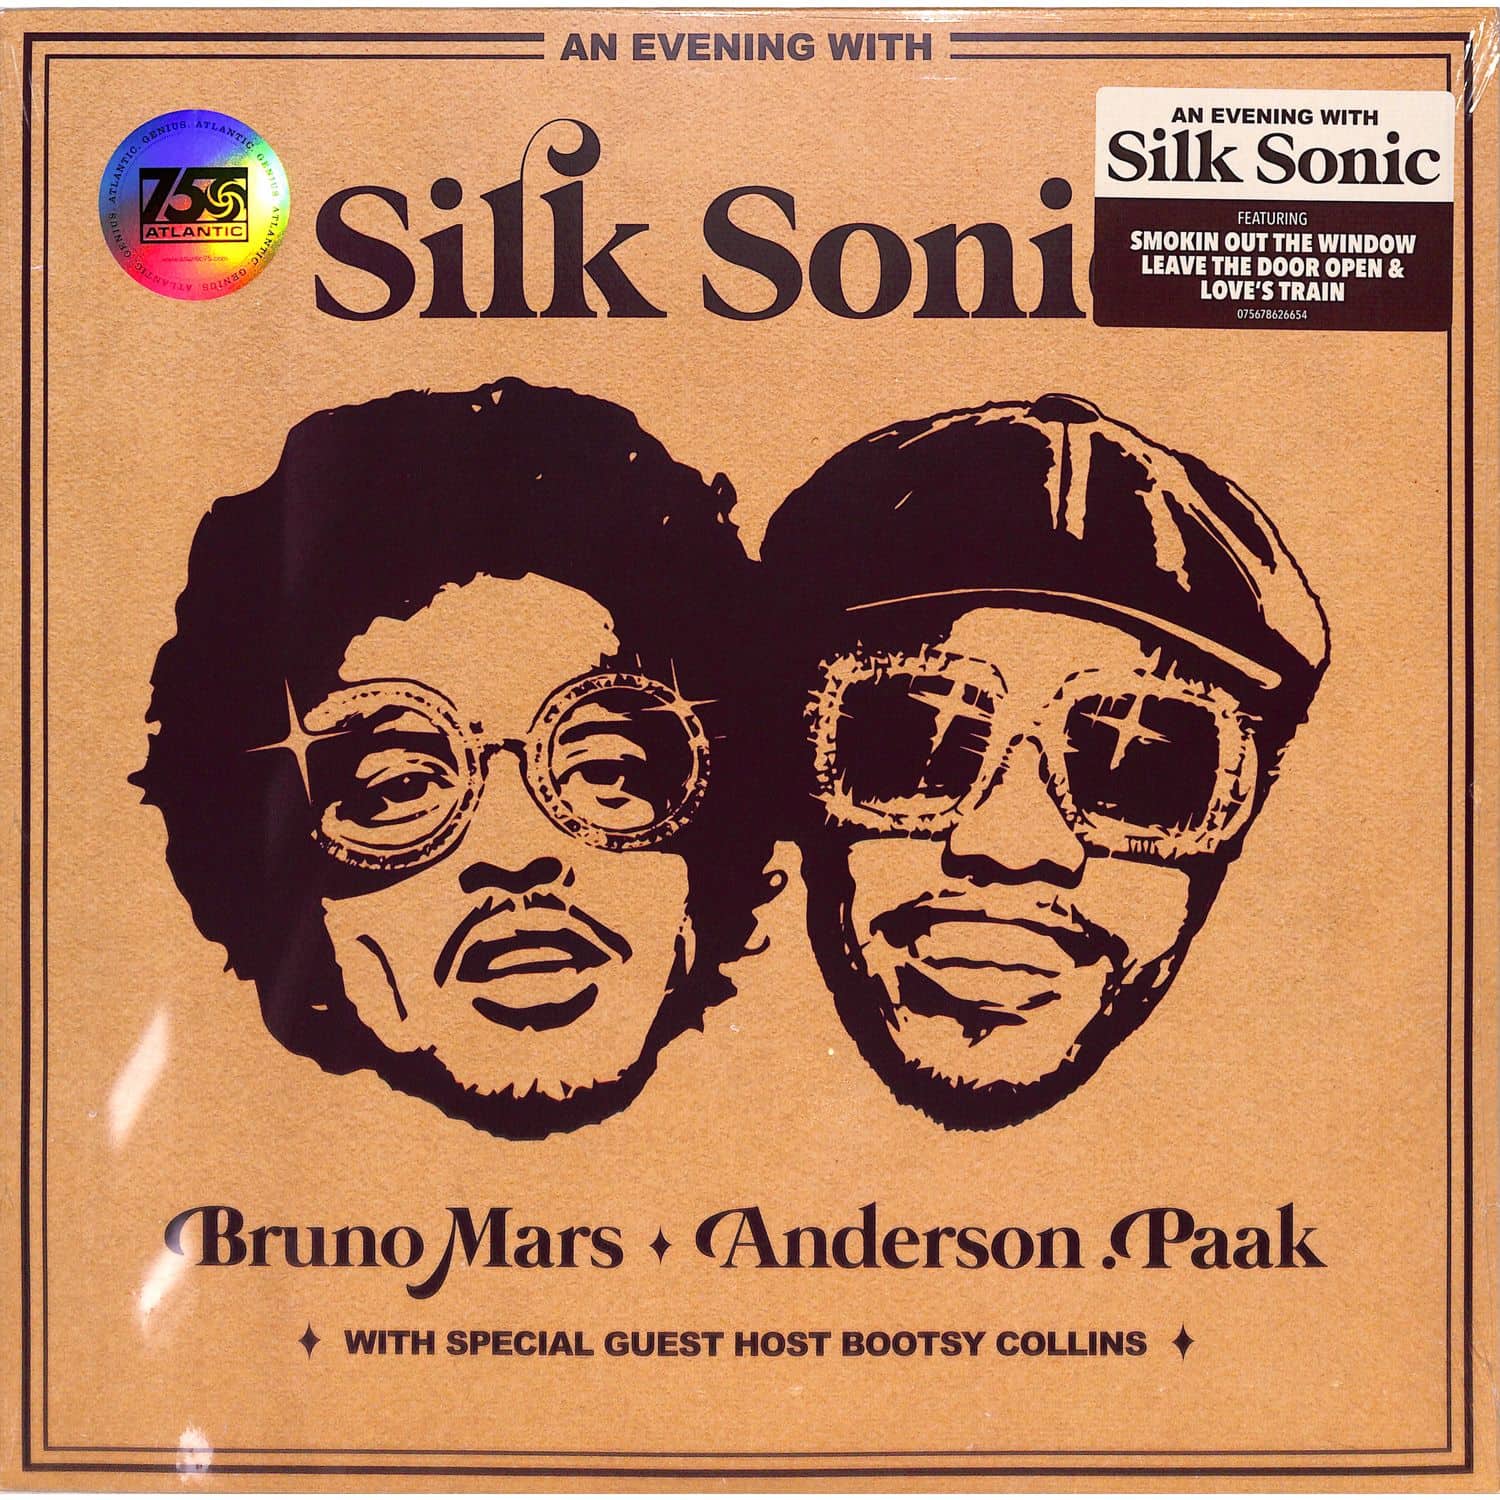 Bruno Mars / Anderson Paak / Silk Sonic - AN EVENING WITH SILK SONIC 